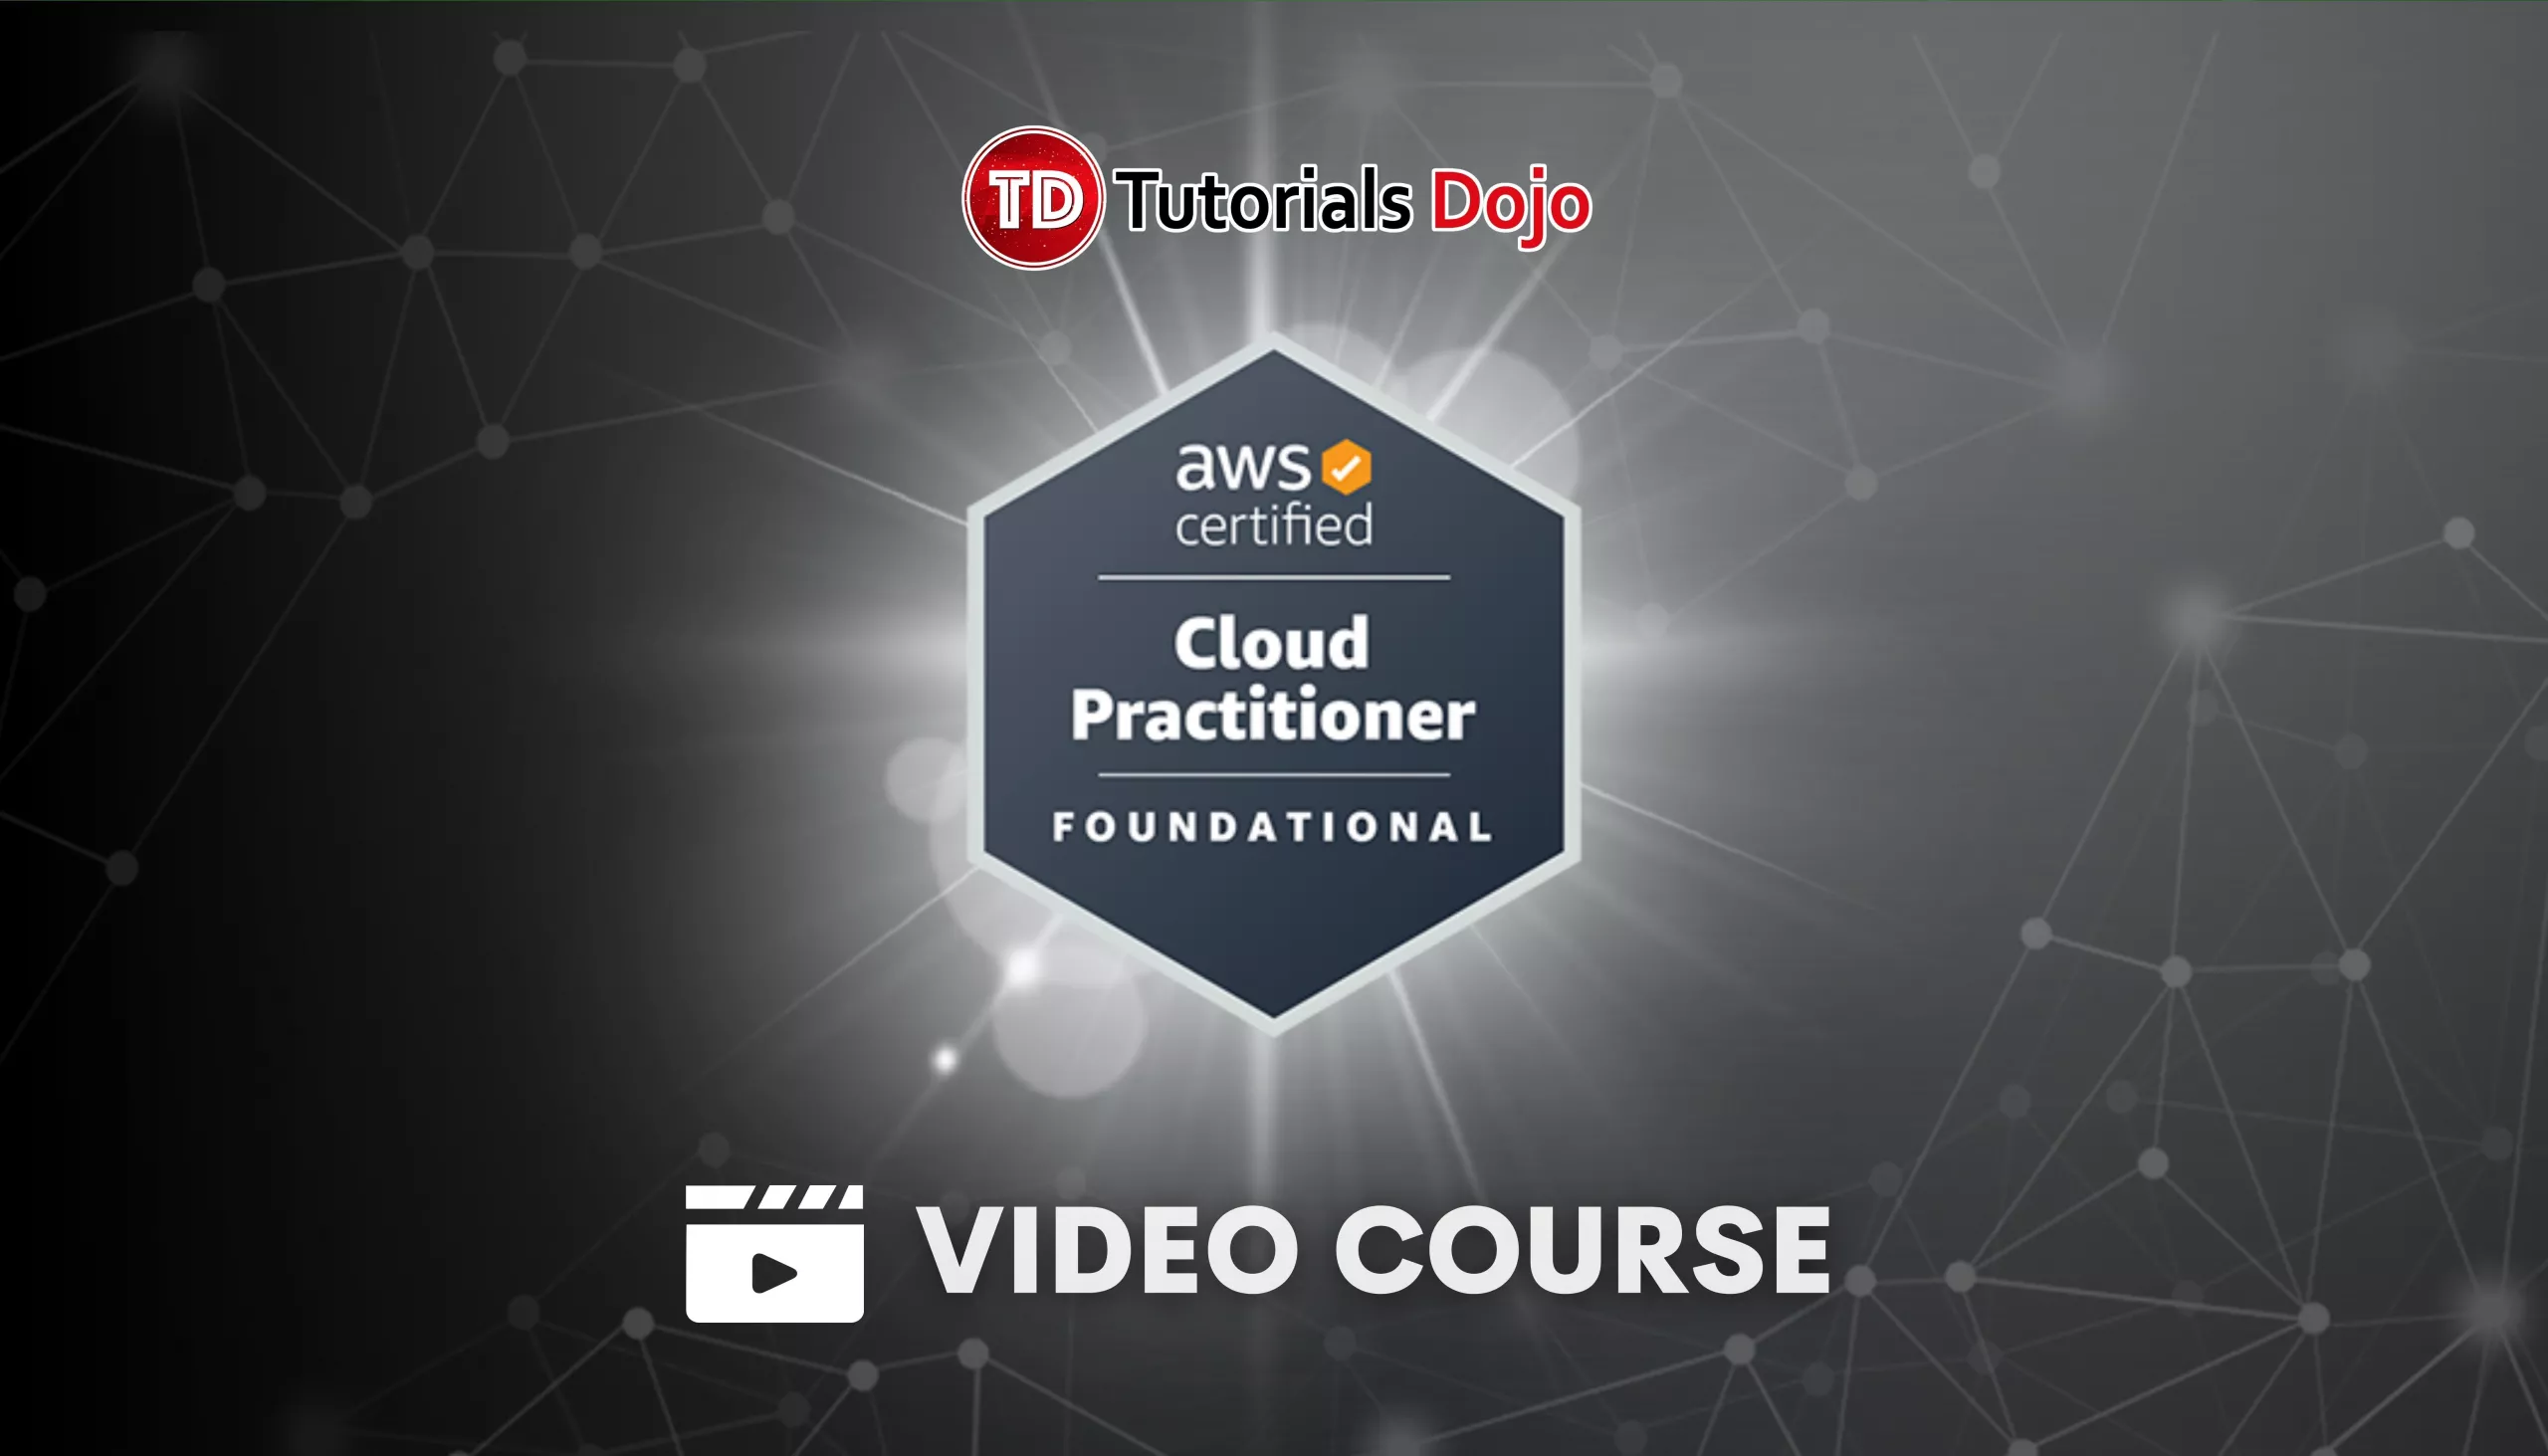 AWS Certified Cloud Practitioner CLF-C01 Video Course
$9.99 USD